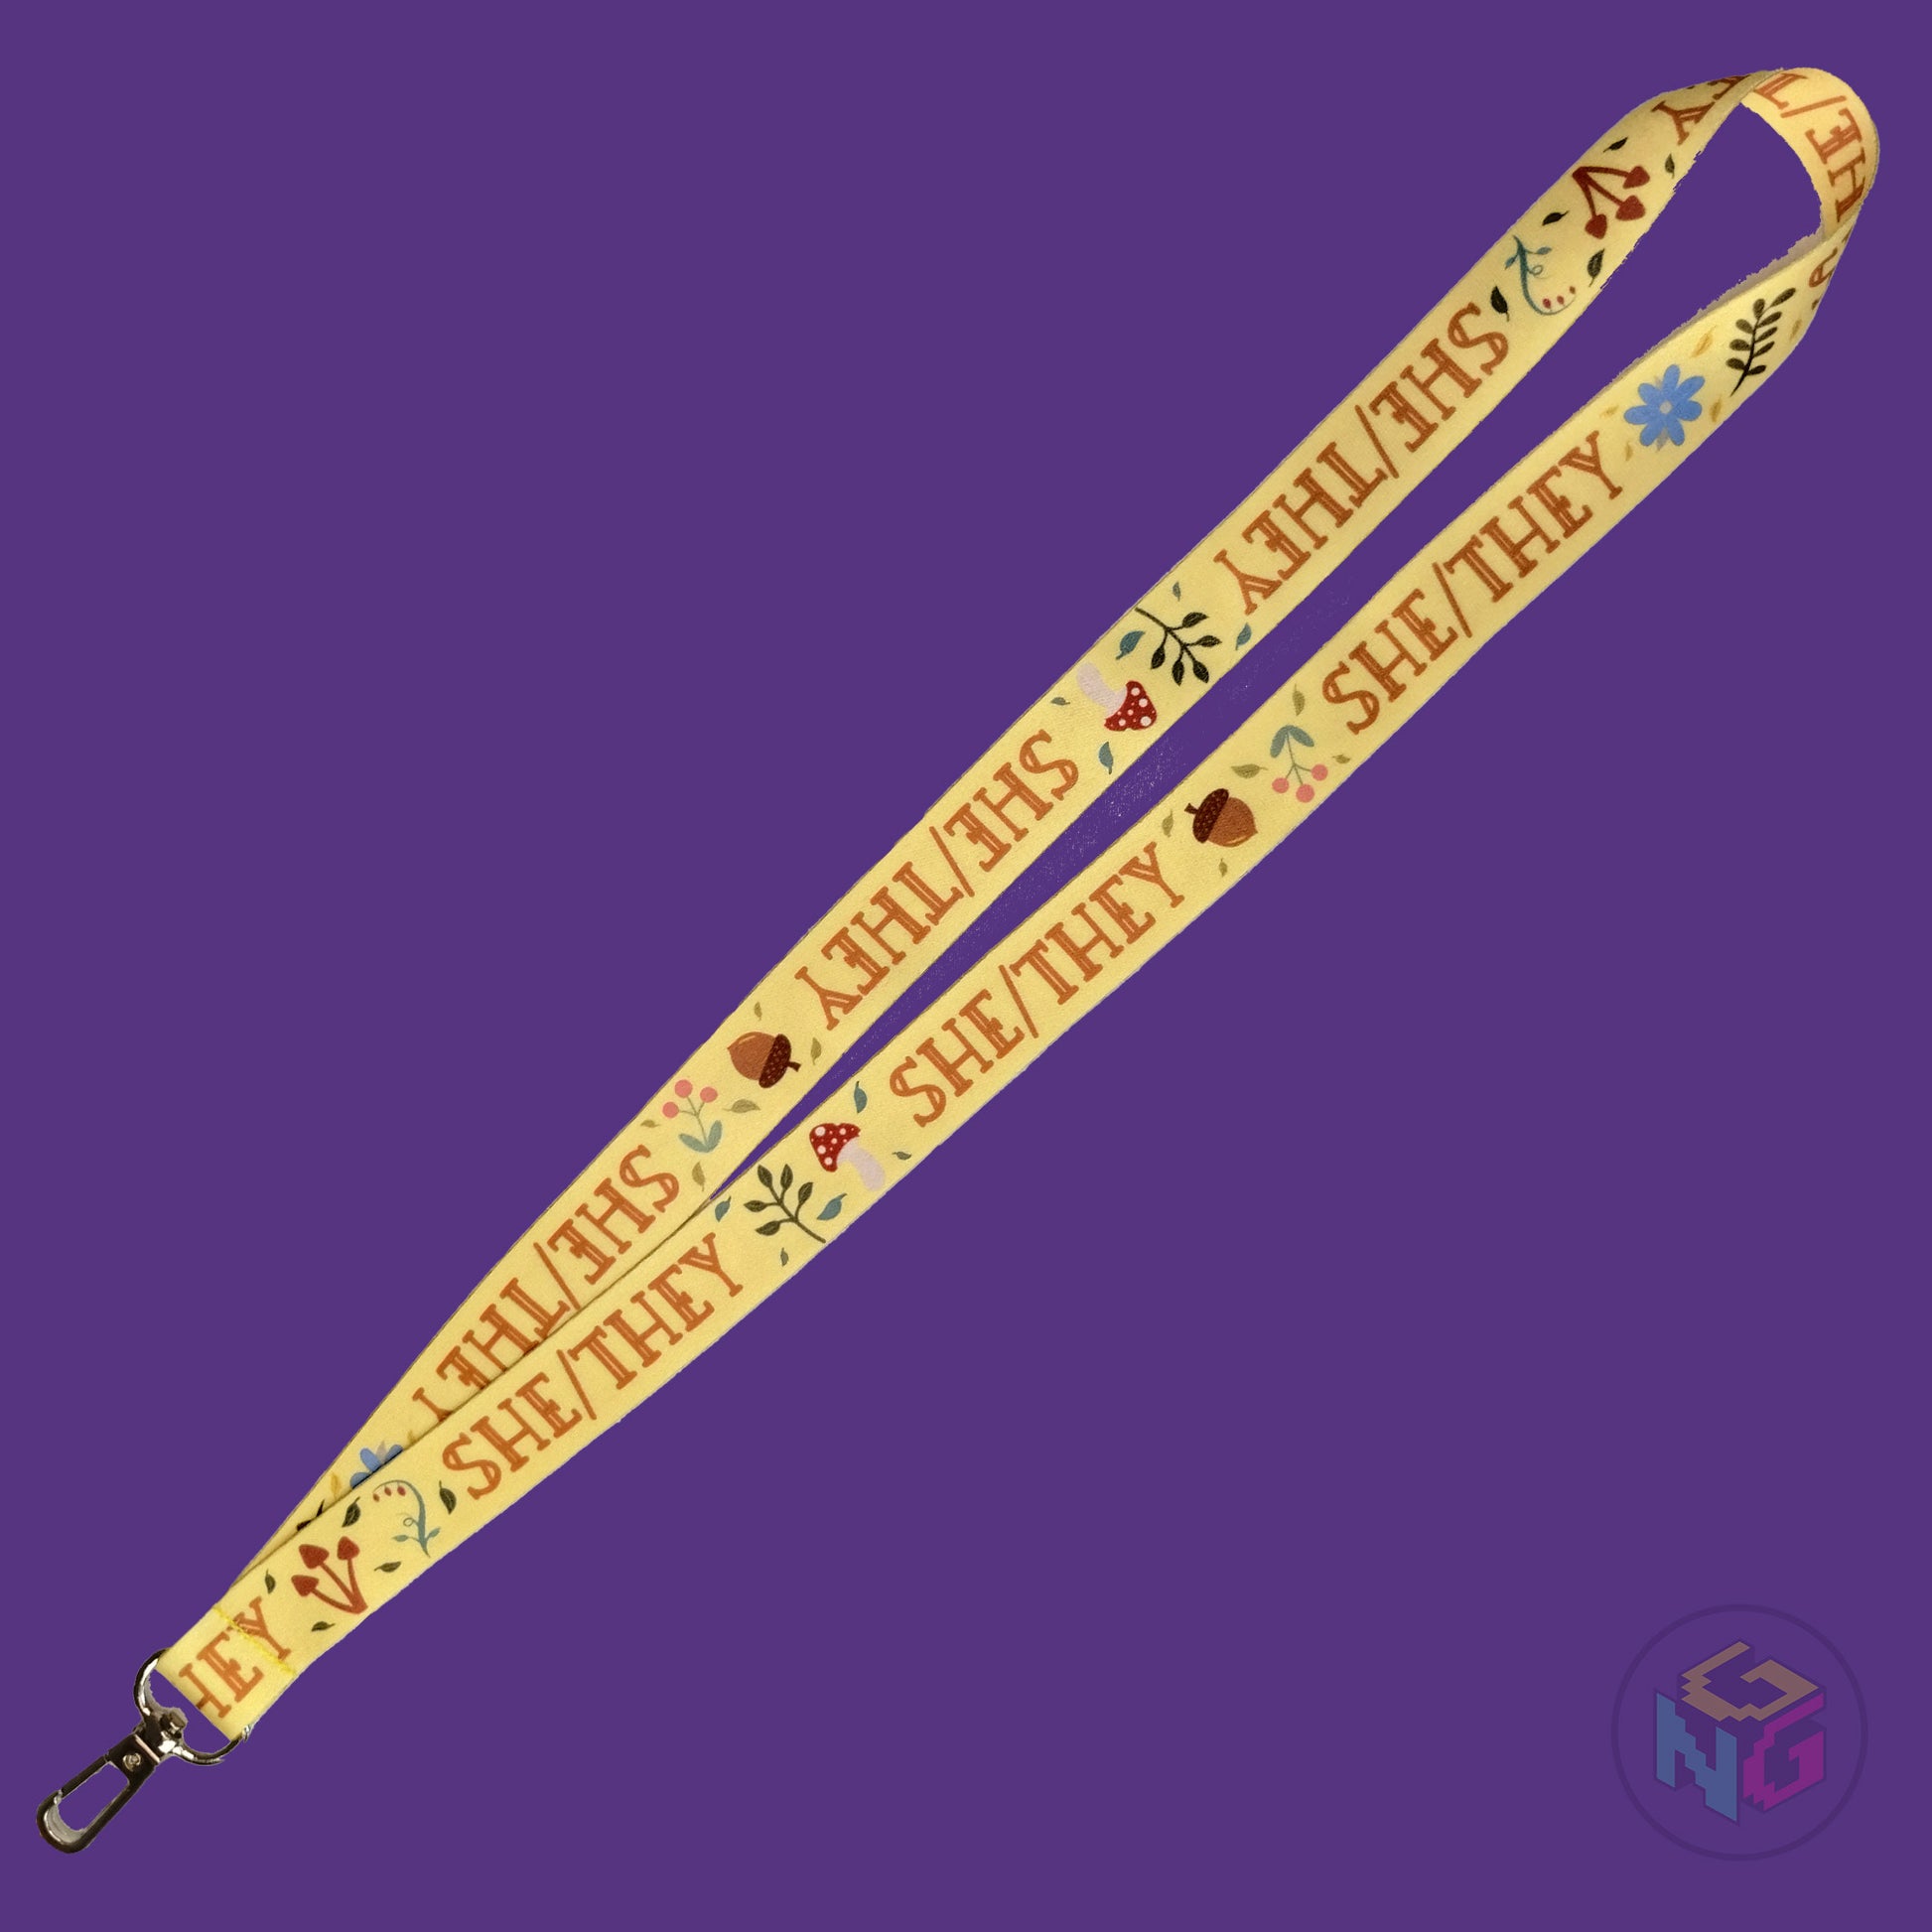 the yellow she they cottagecore lanyard lying flat showing the complete design and repeating pattern of acorns, berries, mushrooms, leaves, and she they pronouns